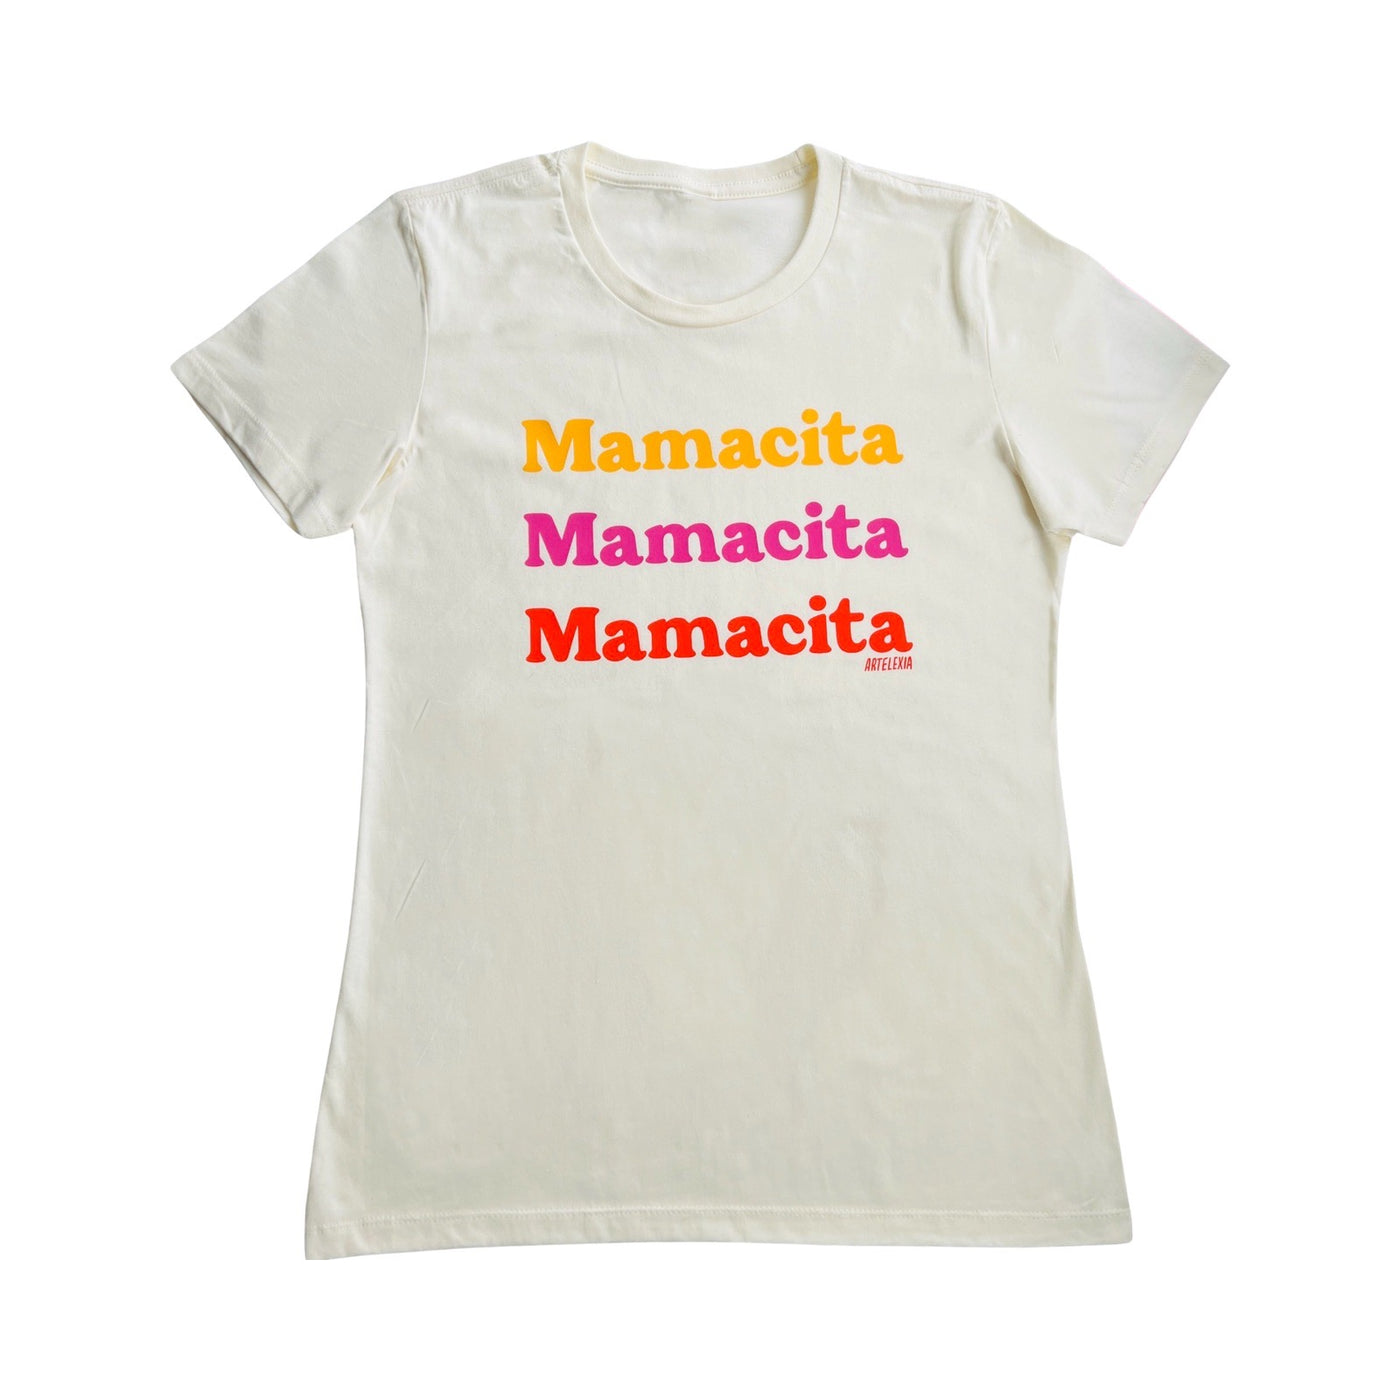 cream colored short sleeve shirt with the word Mamacita repeated three times in the color yellow, pink and orange.